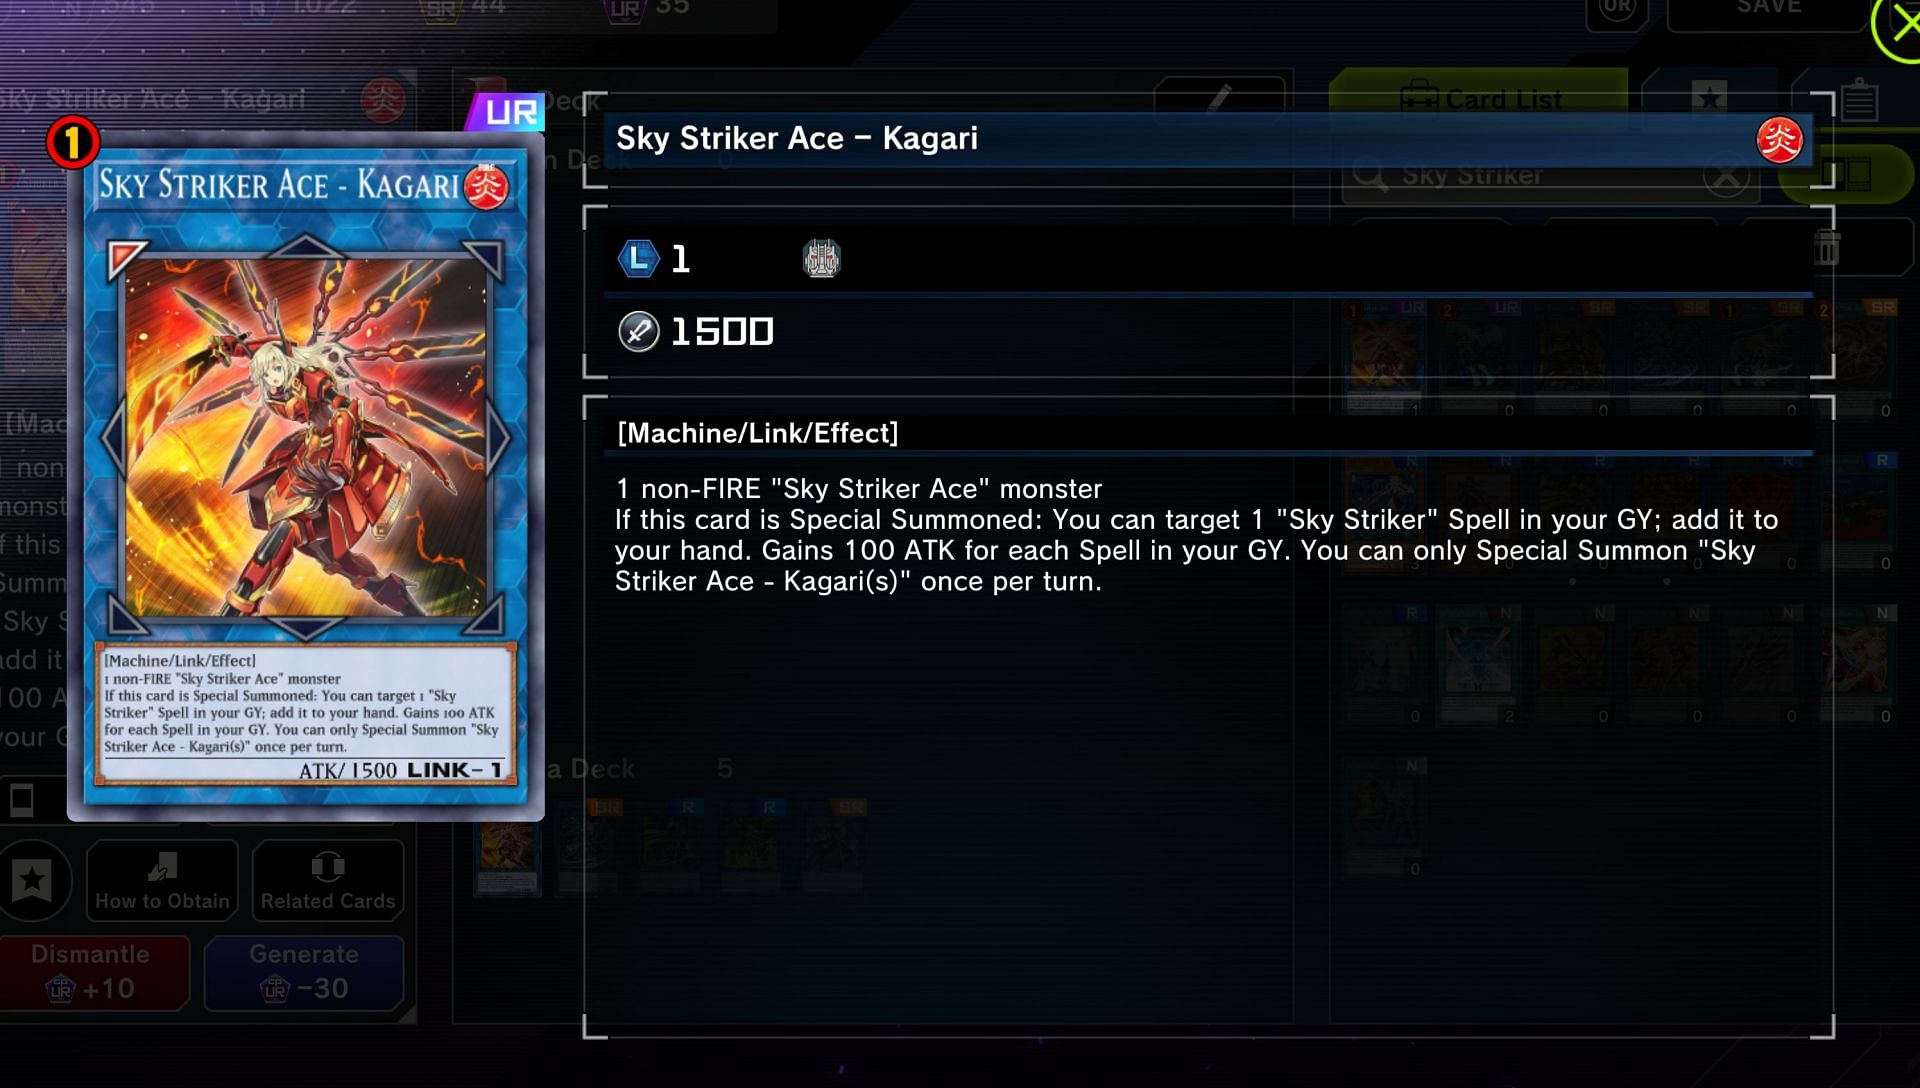 Sky Striker Ace - Kagari is one of the many ways this deck can win (Image via Konami)